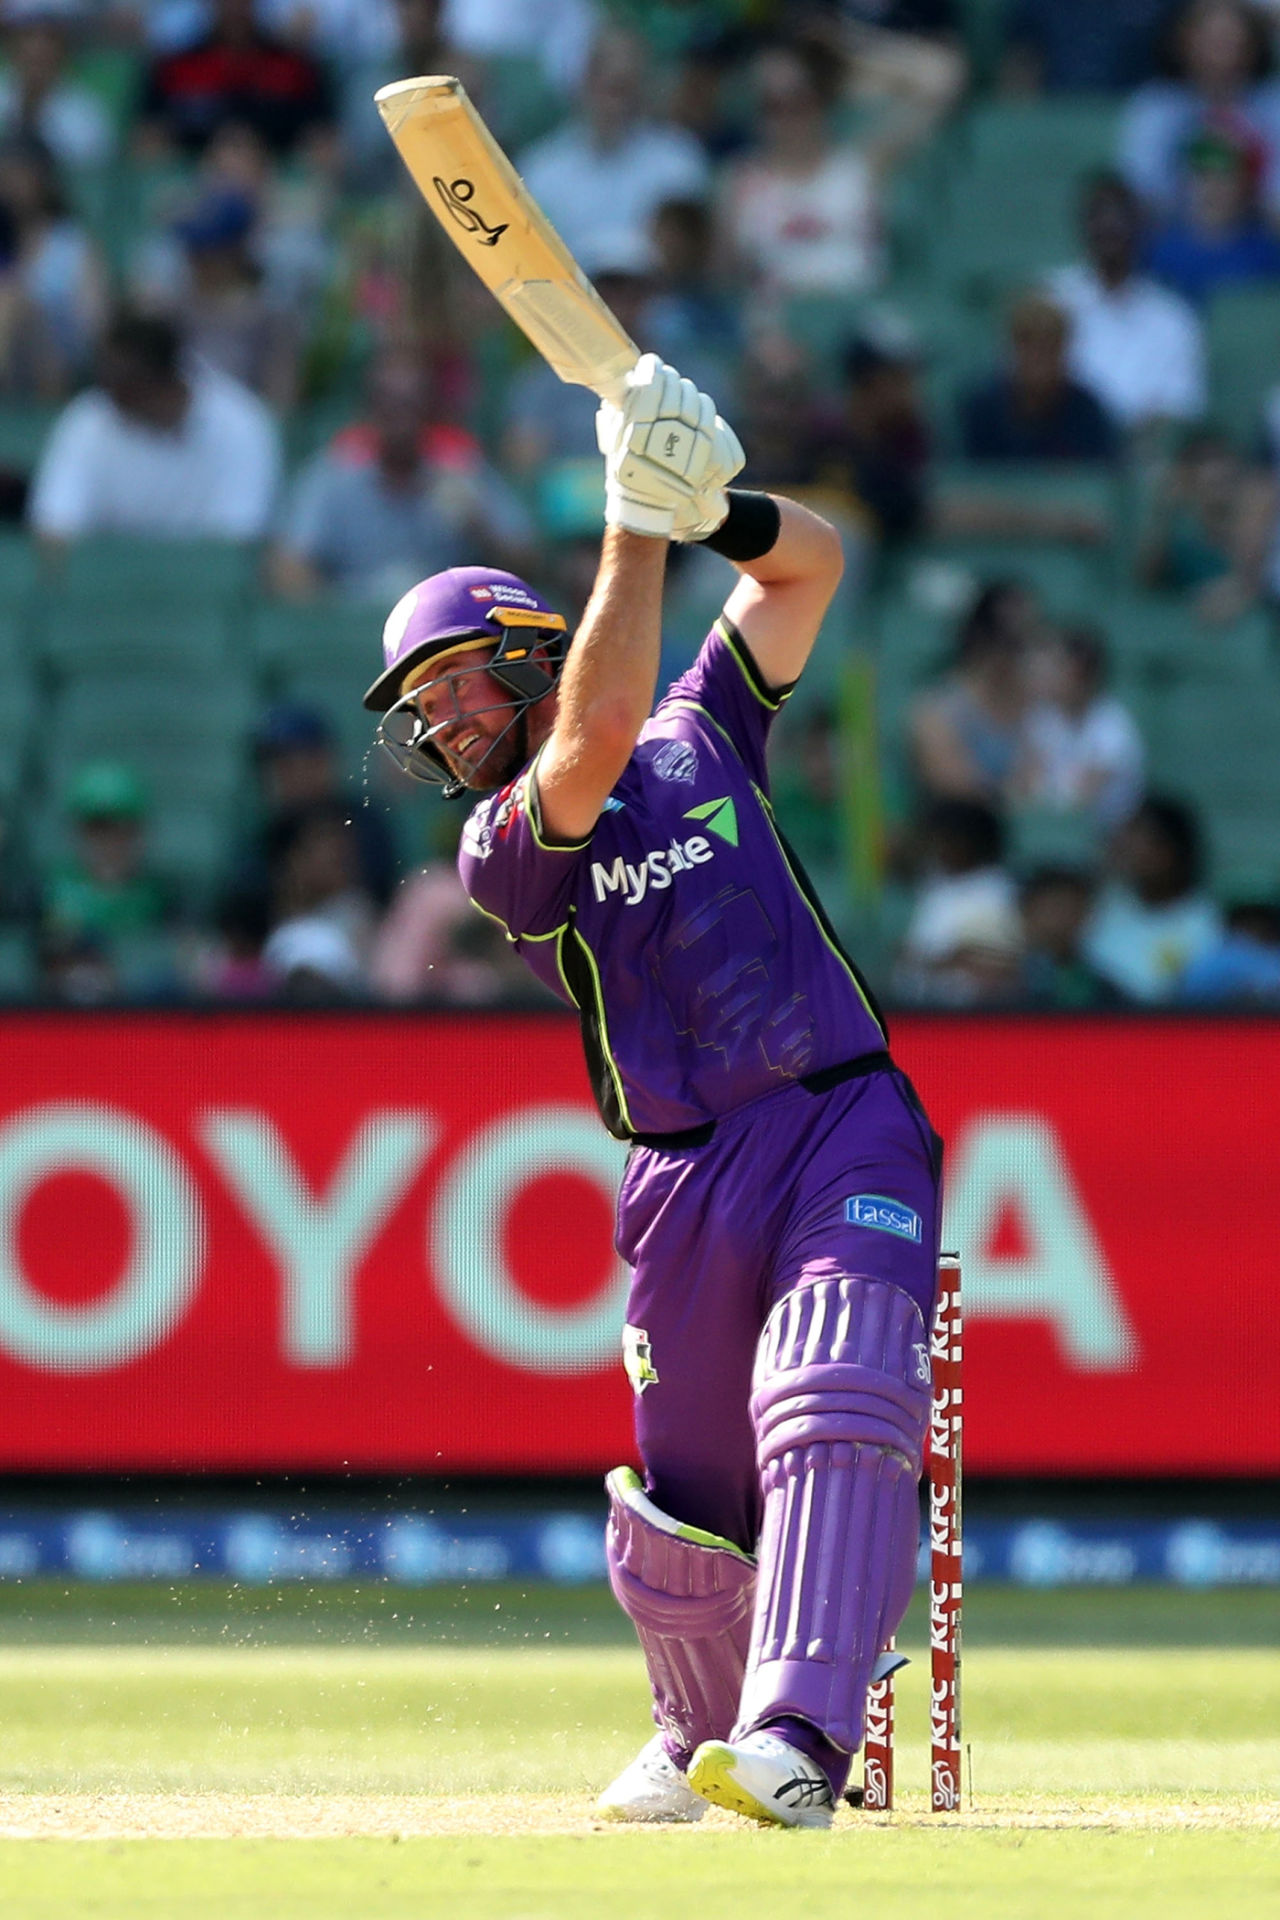 Daniel Christian launches one over the covers, Stars v Hurricanes, Big Bash League, Melbourne, January 27, 2018